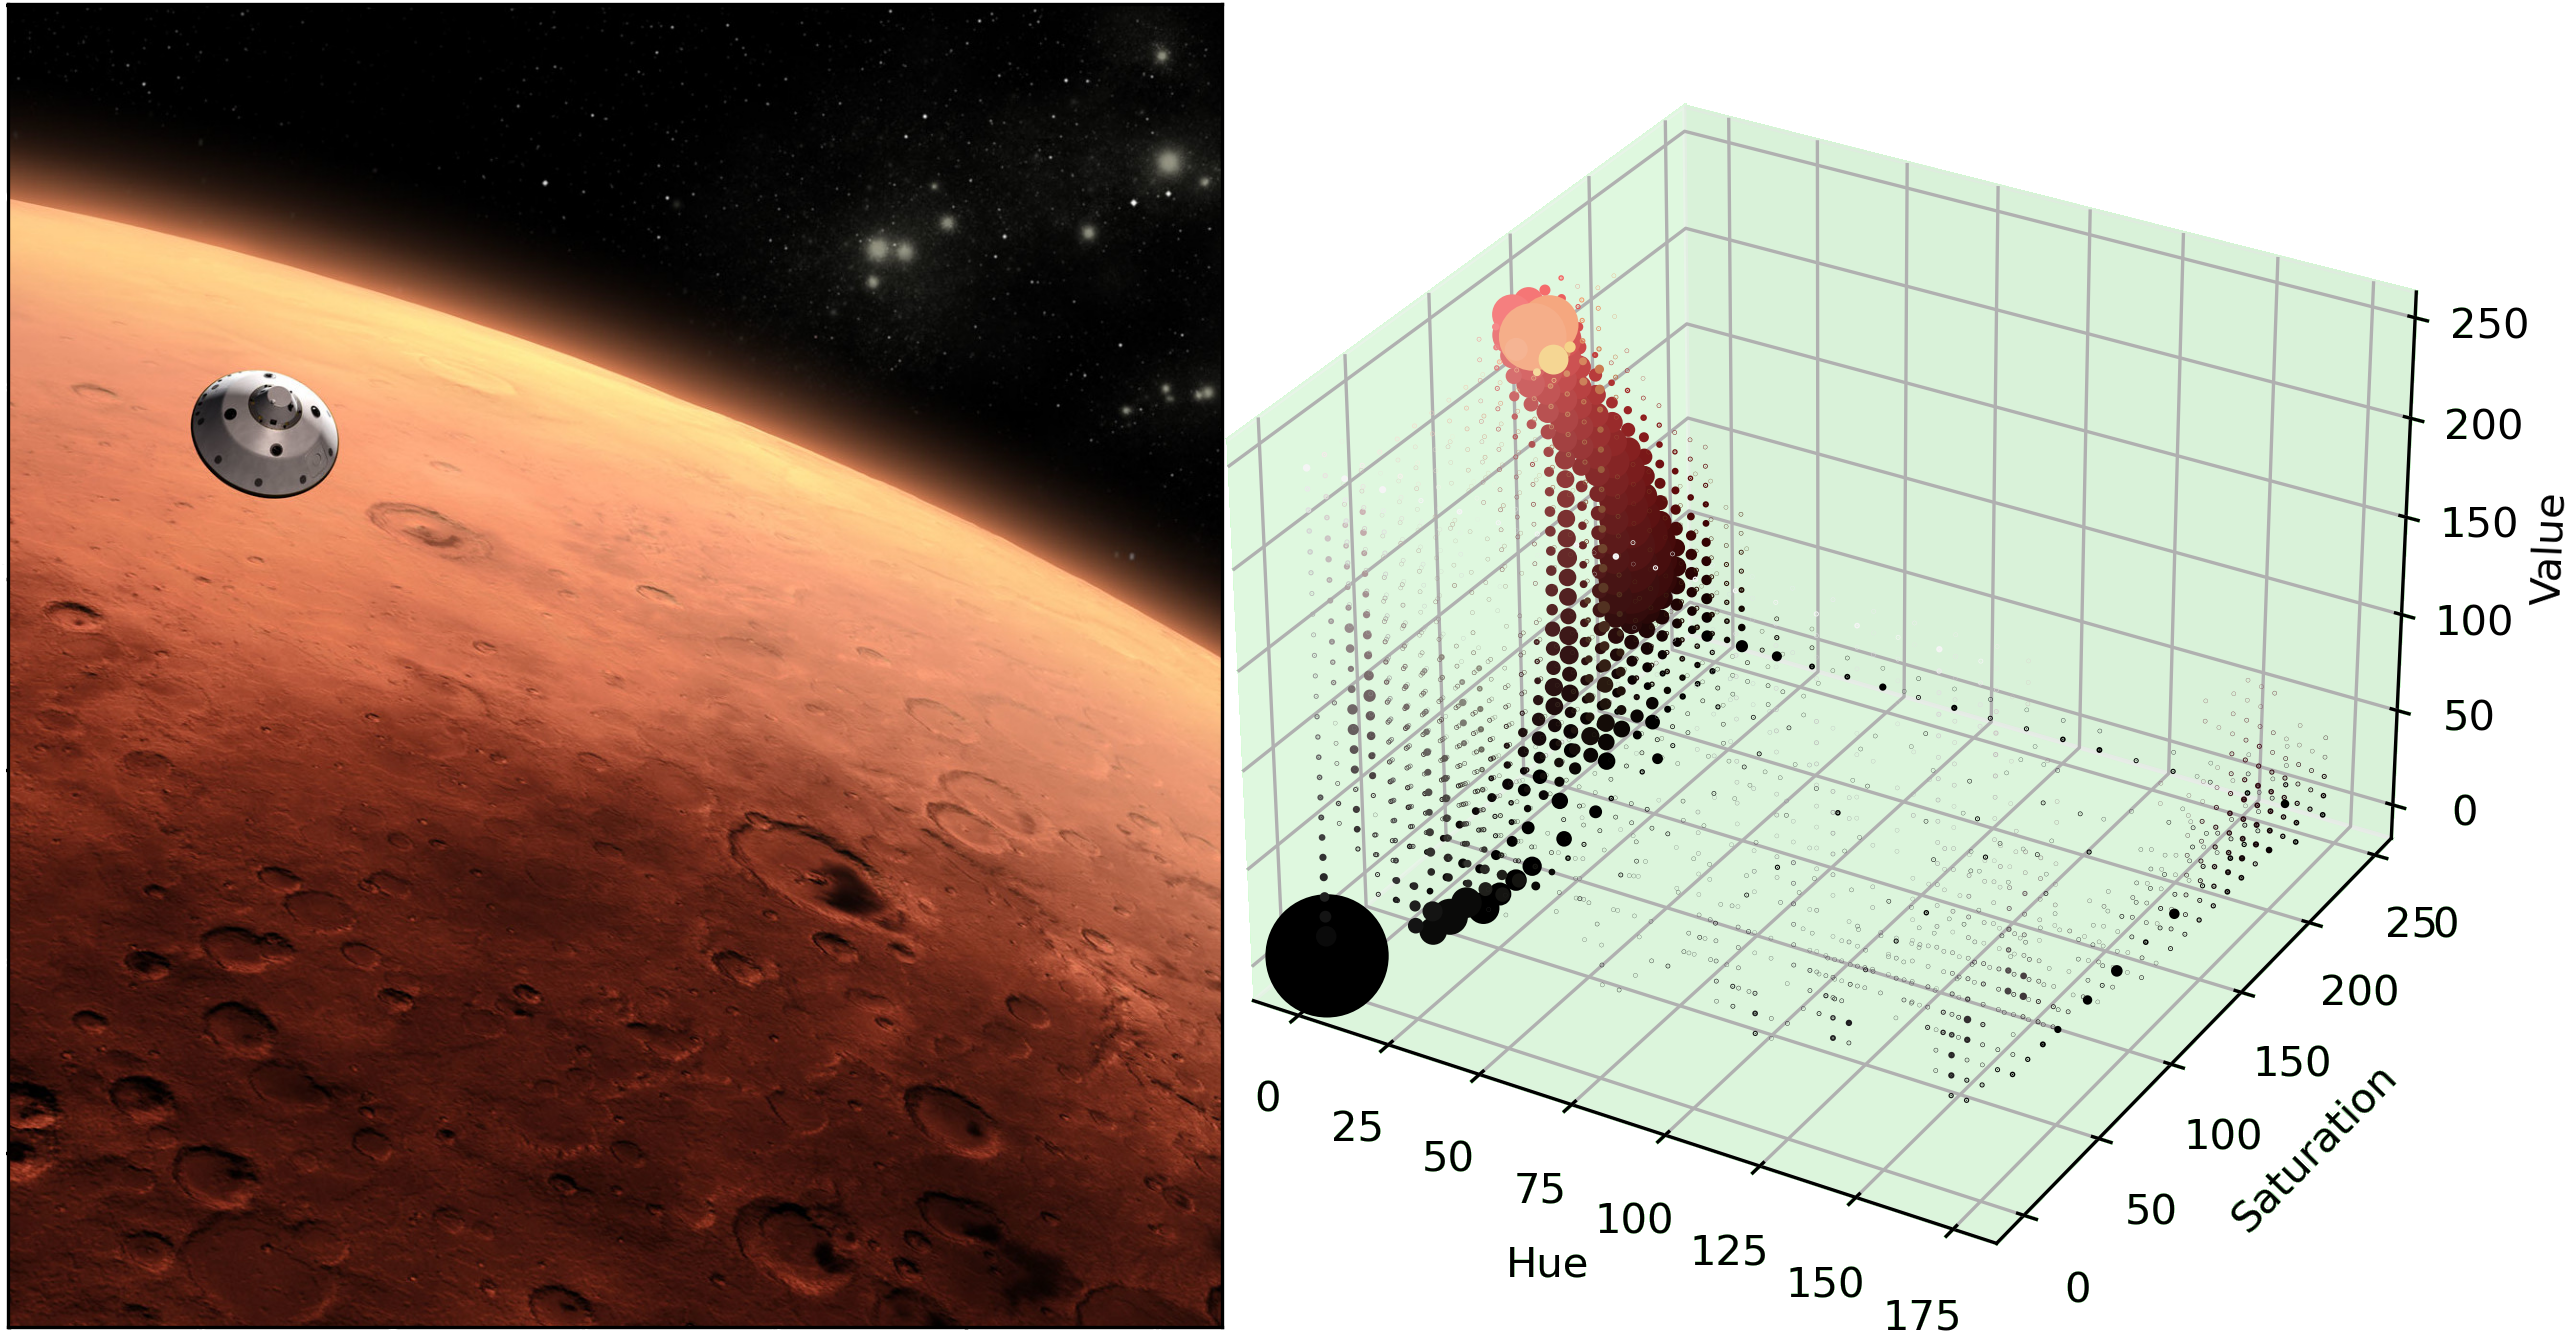 Image of mars and the corresponding HSV histogram.